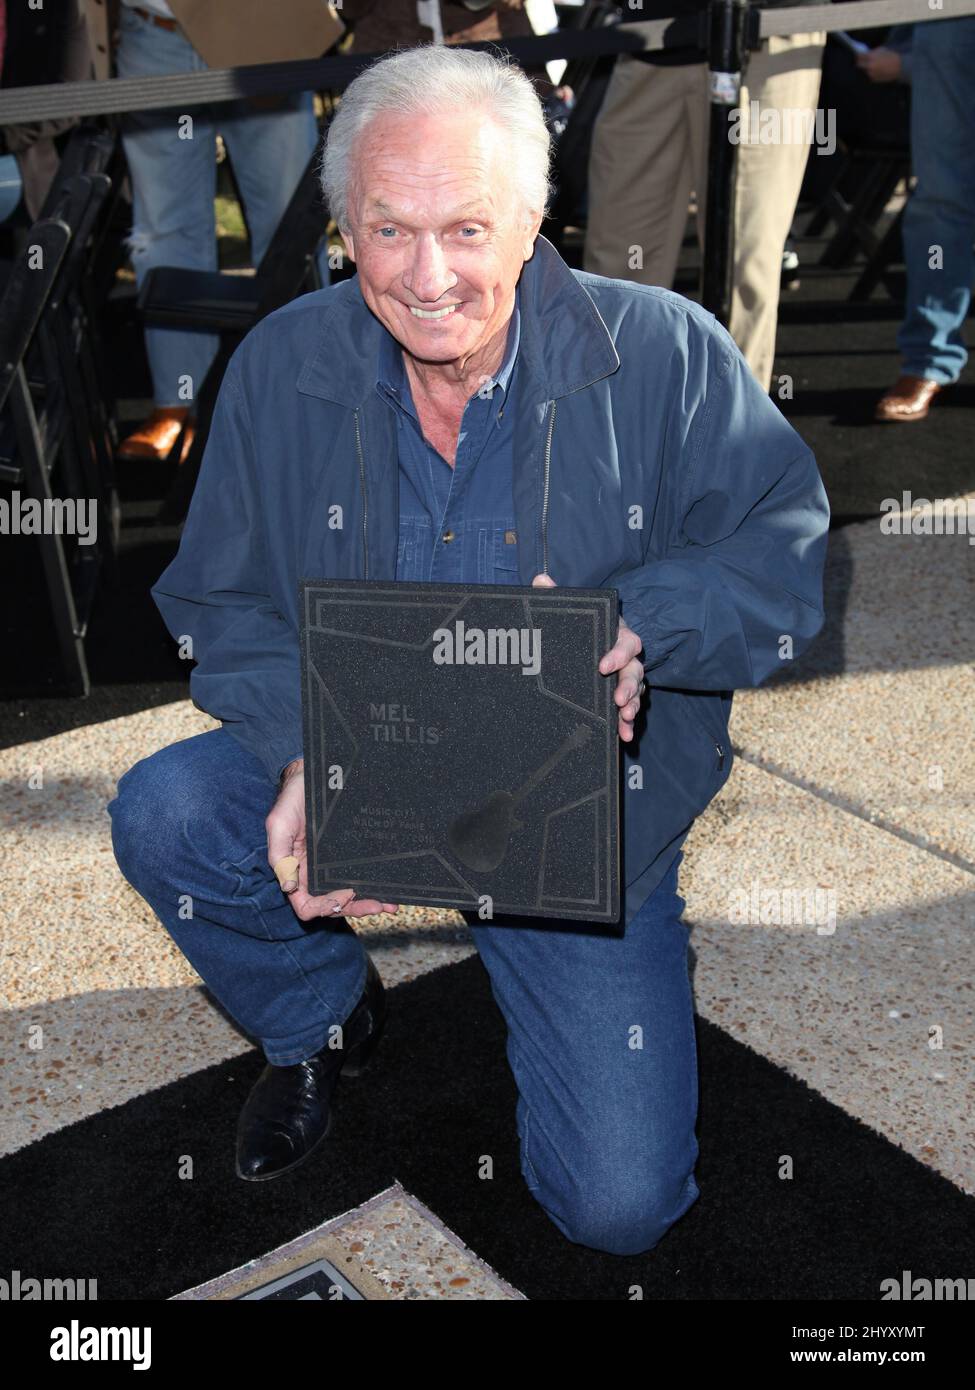 Mel Tillis during their introduction ceremony to the Music Walk Of Fame in Nashville, Tennessee Stock Photo